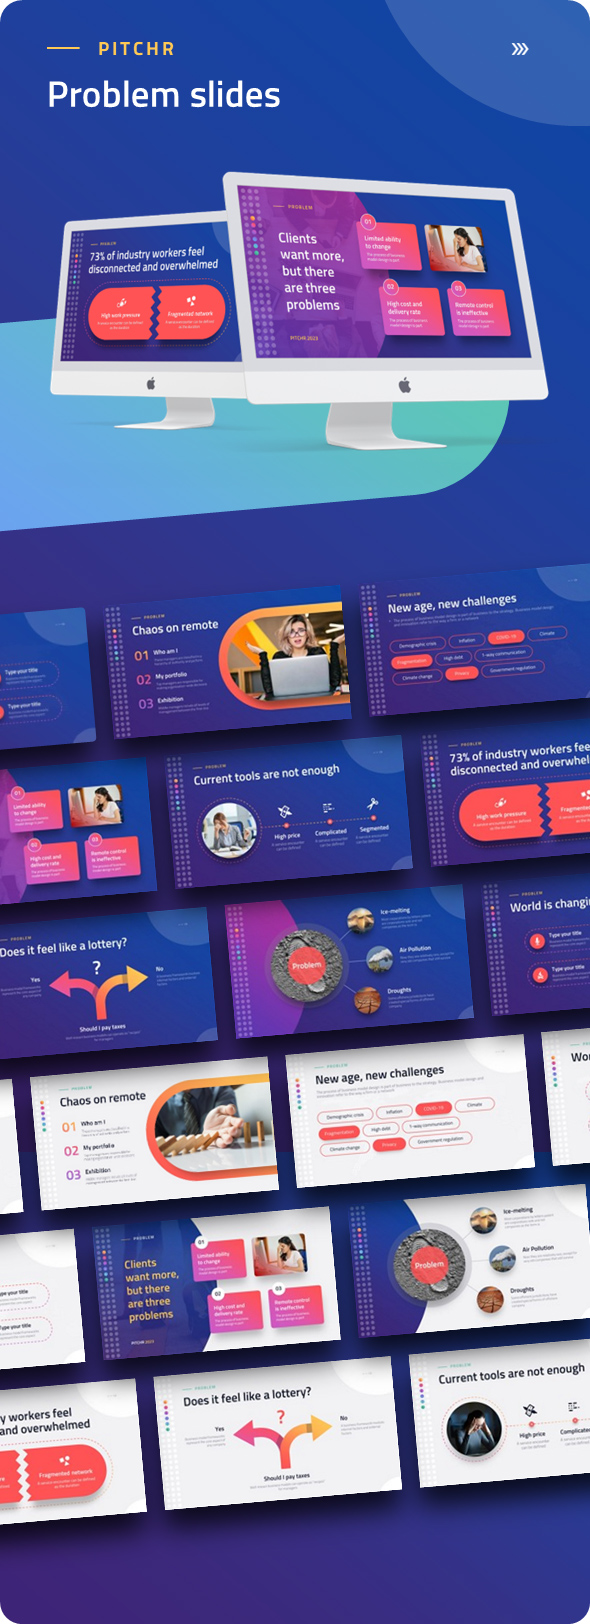 PITCHR – Premium Pitch Deck Template for PowerPoint - 13